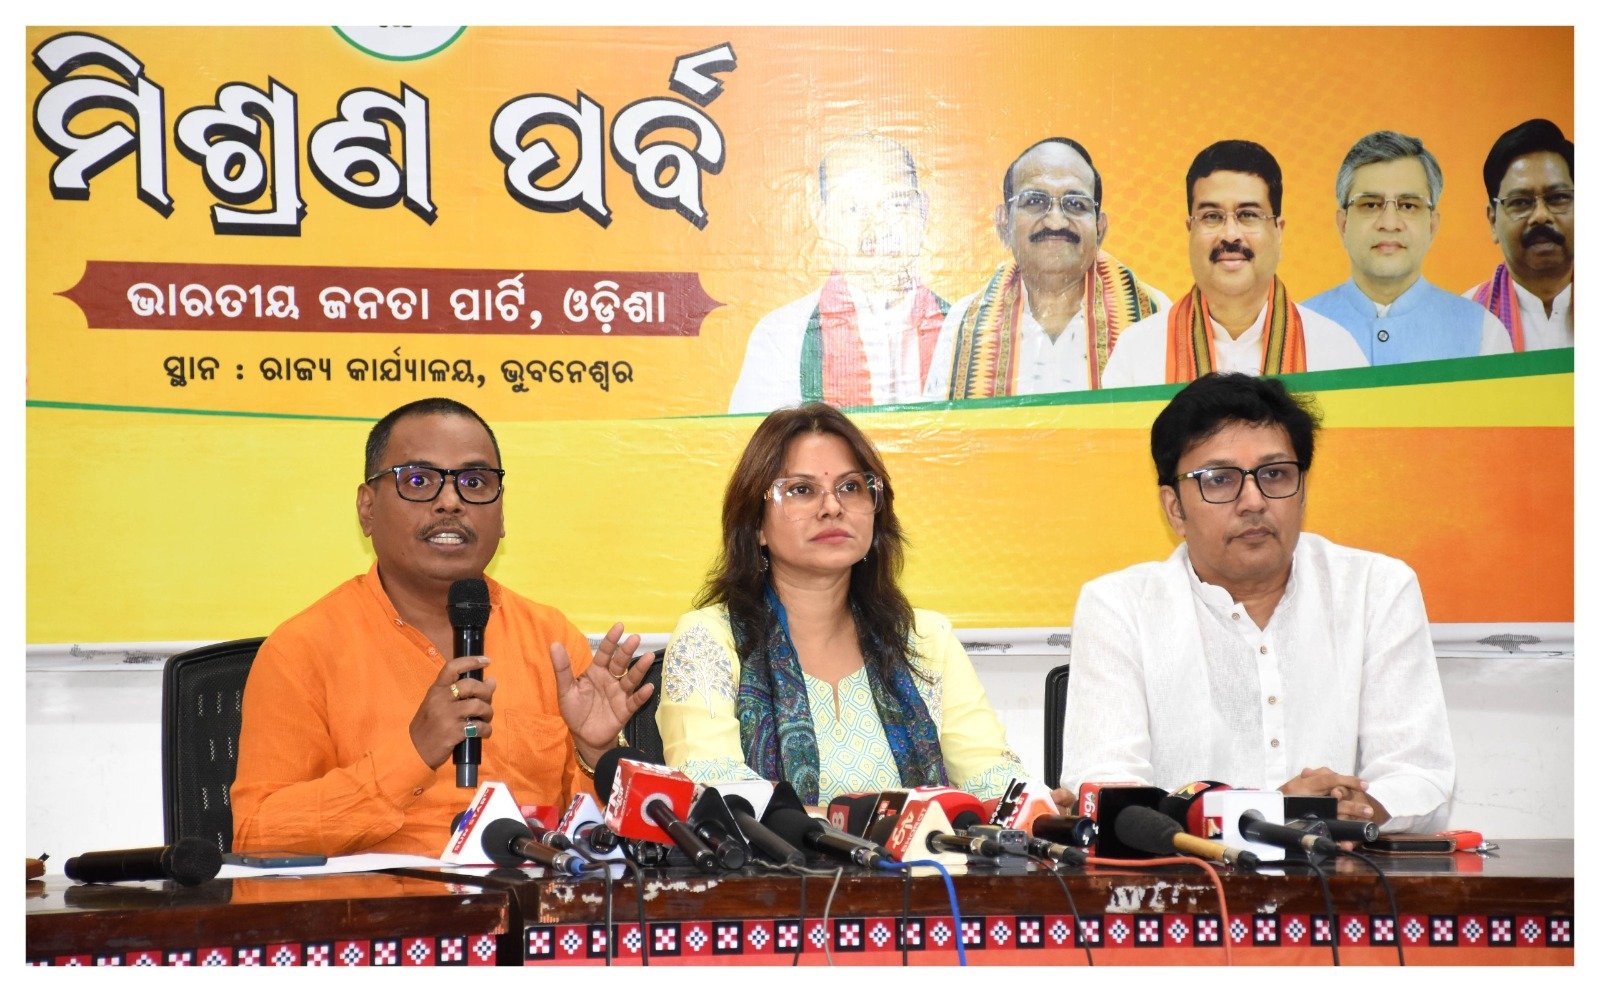 BJP questions BJD's celebrity outreach amidst political shifts in Odisha